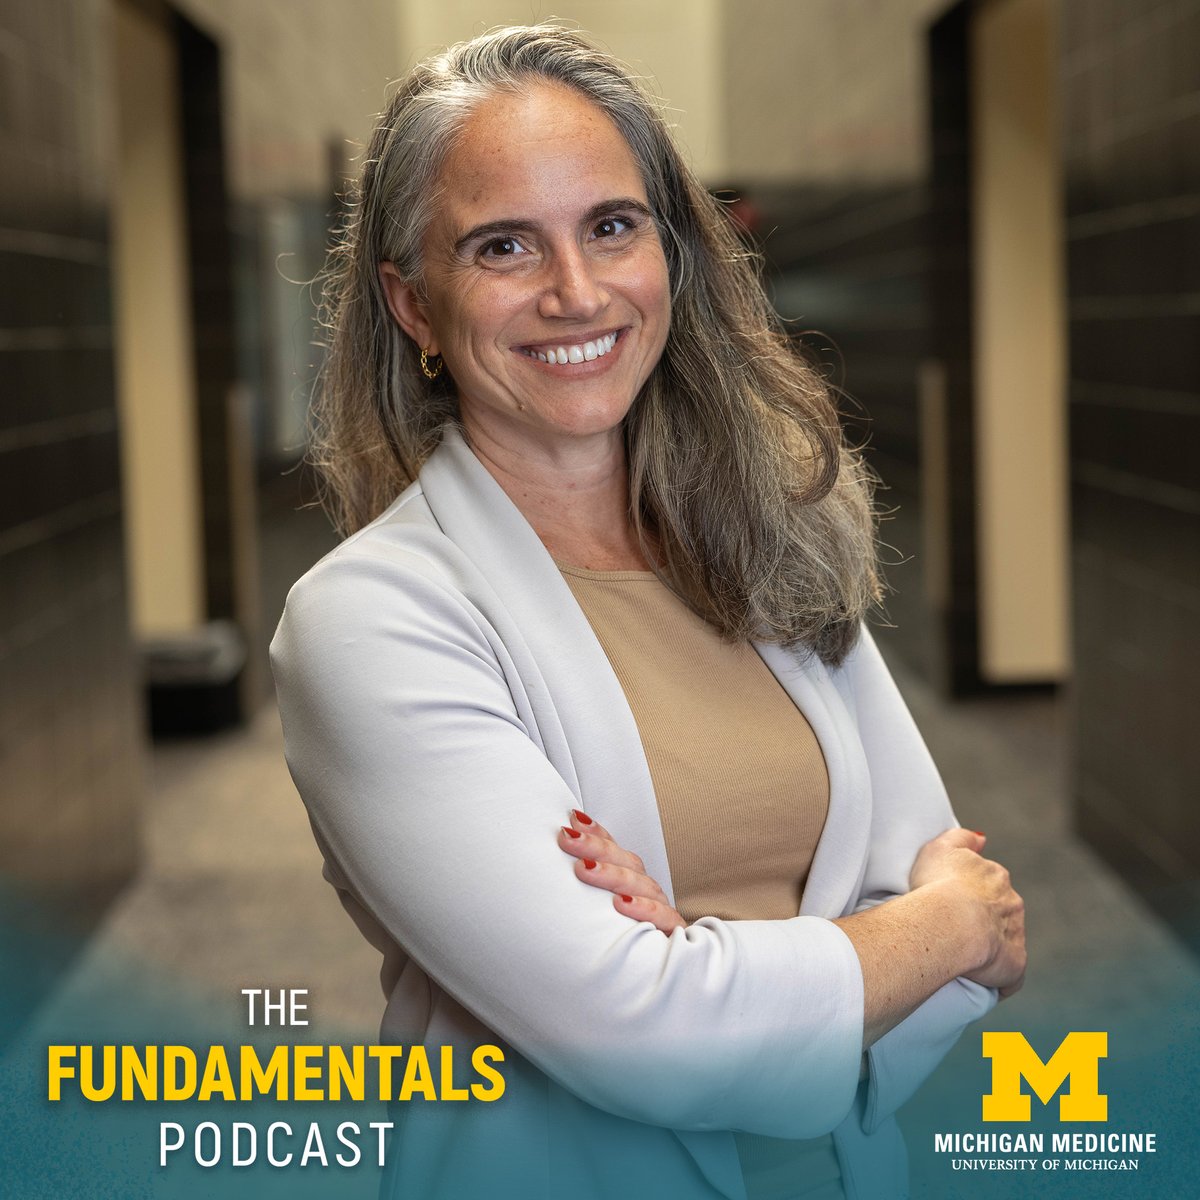 Dr. Jody Platt (@jeplatt) talks with #TheFundamentals about her research on ethically collecting patient health data, with a focus on emerging #AI technology, and how to build trust as a scientist. “The skepticism is justified.”@umichDLHS 🎧 michmed.org/wrXen